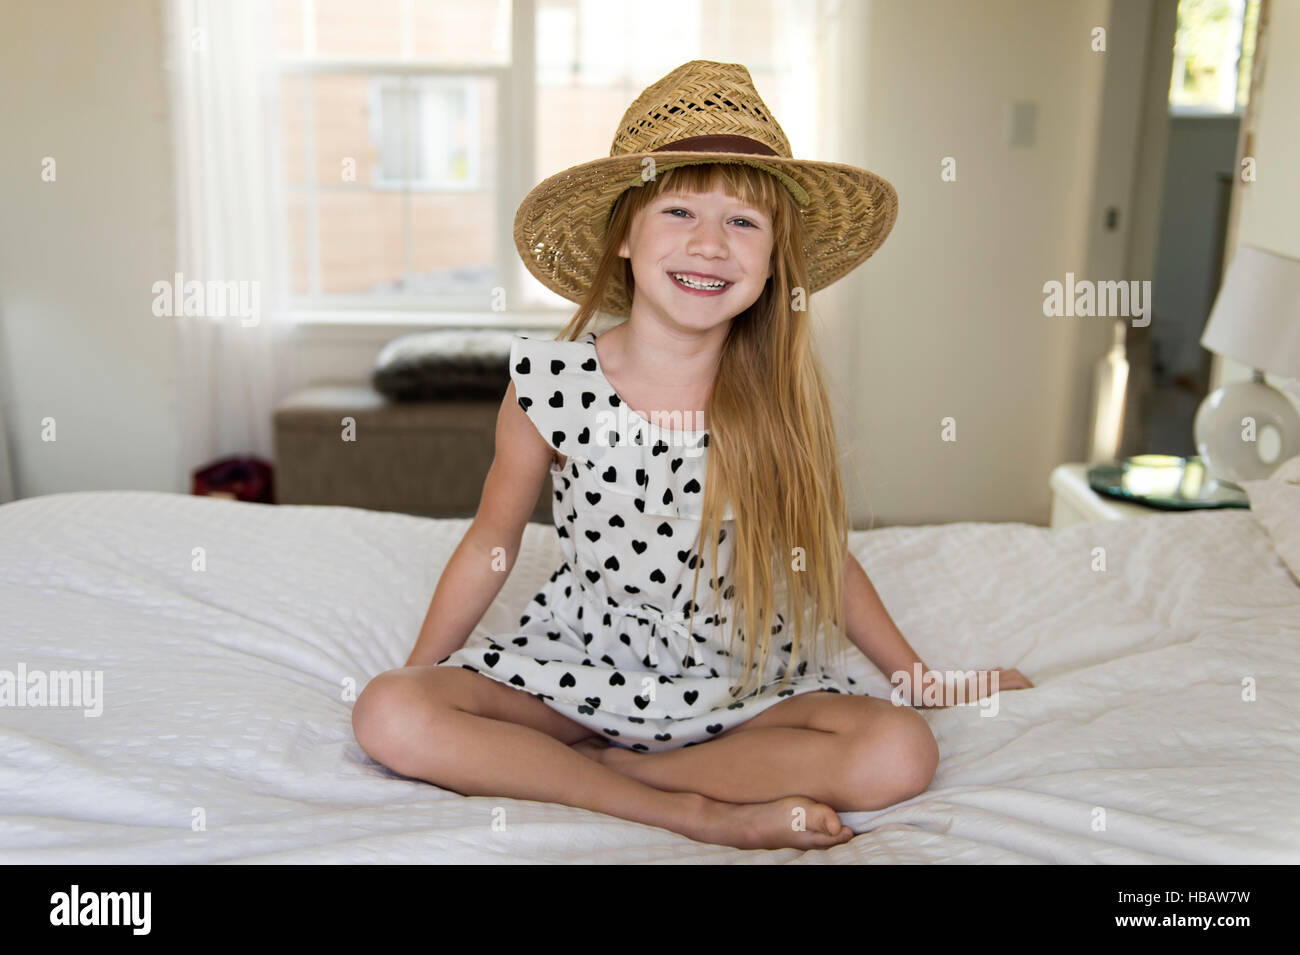 Young Girl sitting on bed smiling, wearing straw hat Banque D'Images